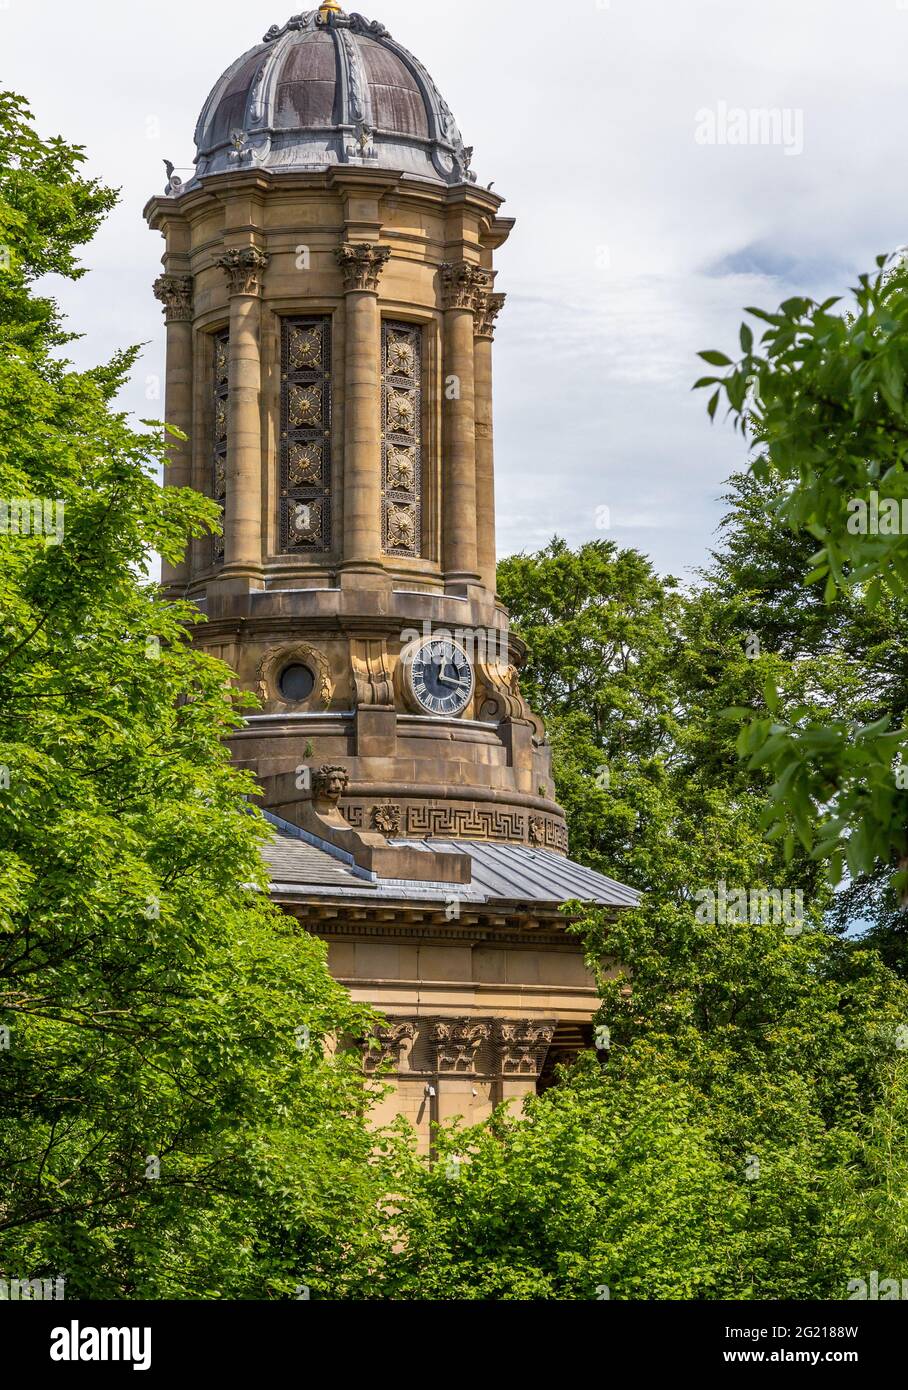 The tower of Saltaire United Reformed Church seen through trees in West Yorkshire. The Victorian church was built by Sir Titus Salt. Stock Photo